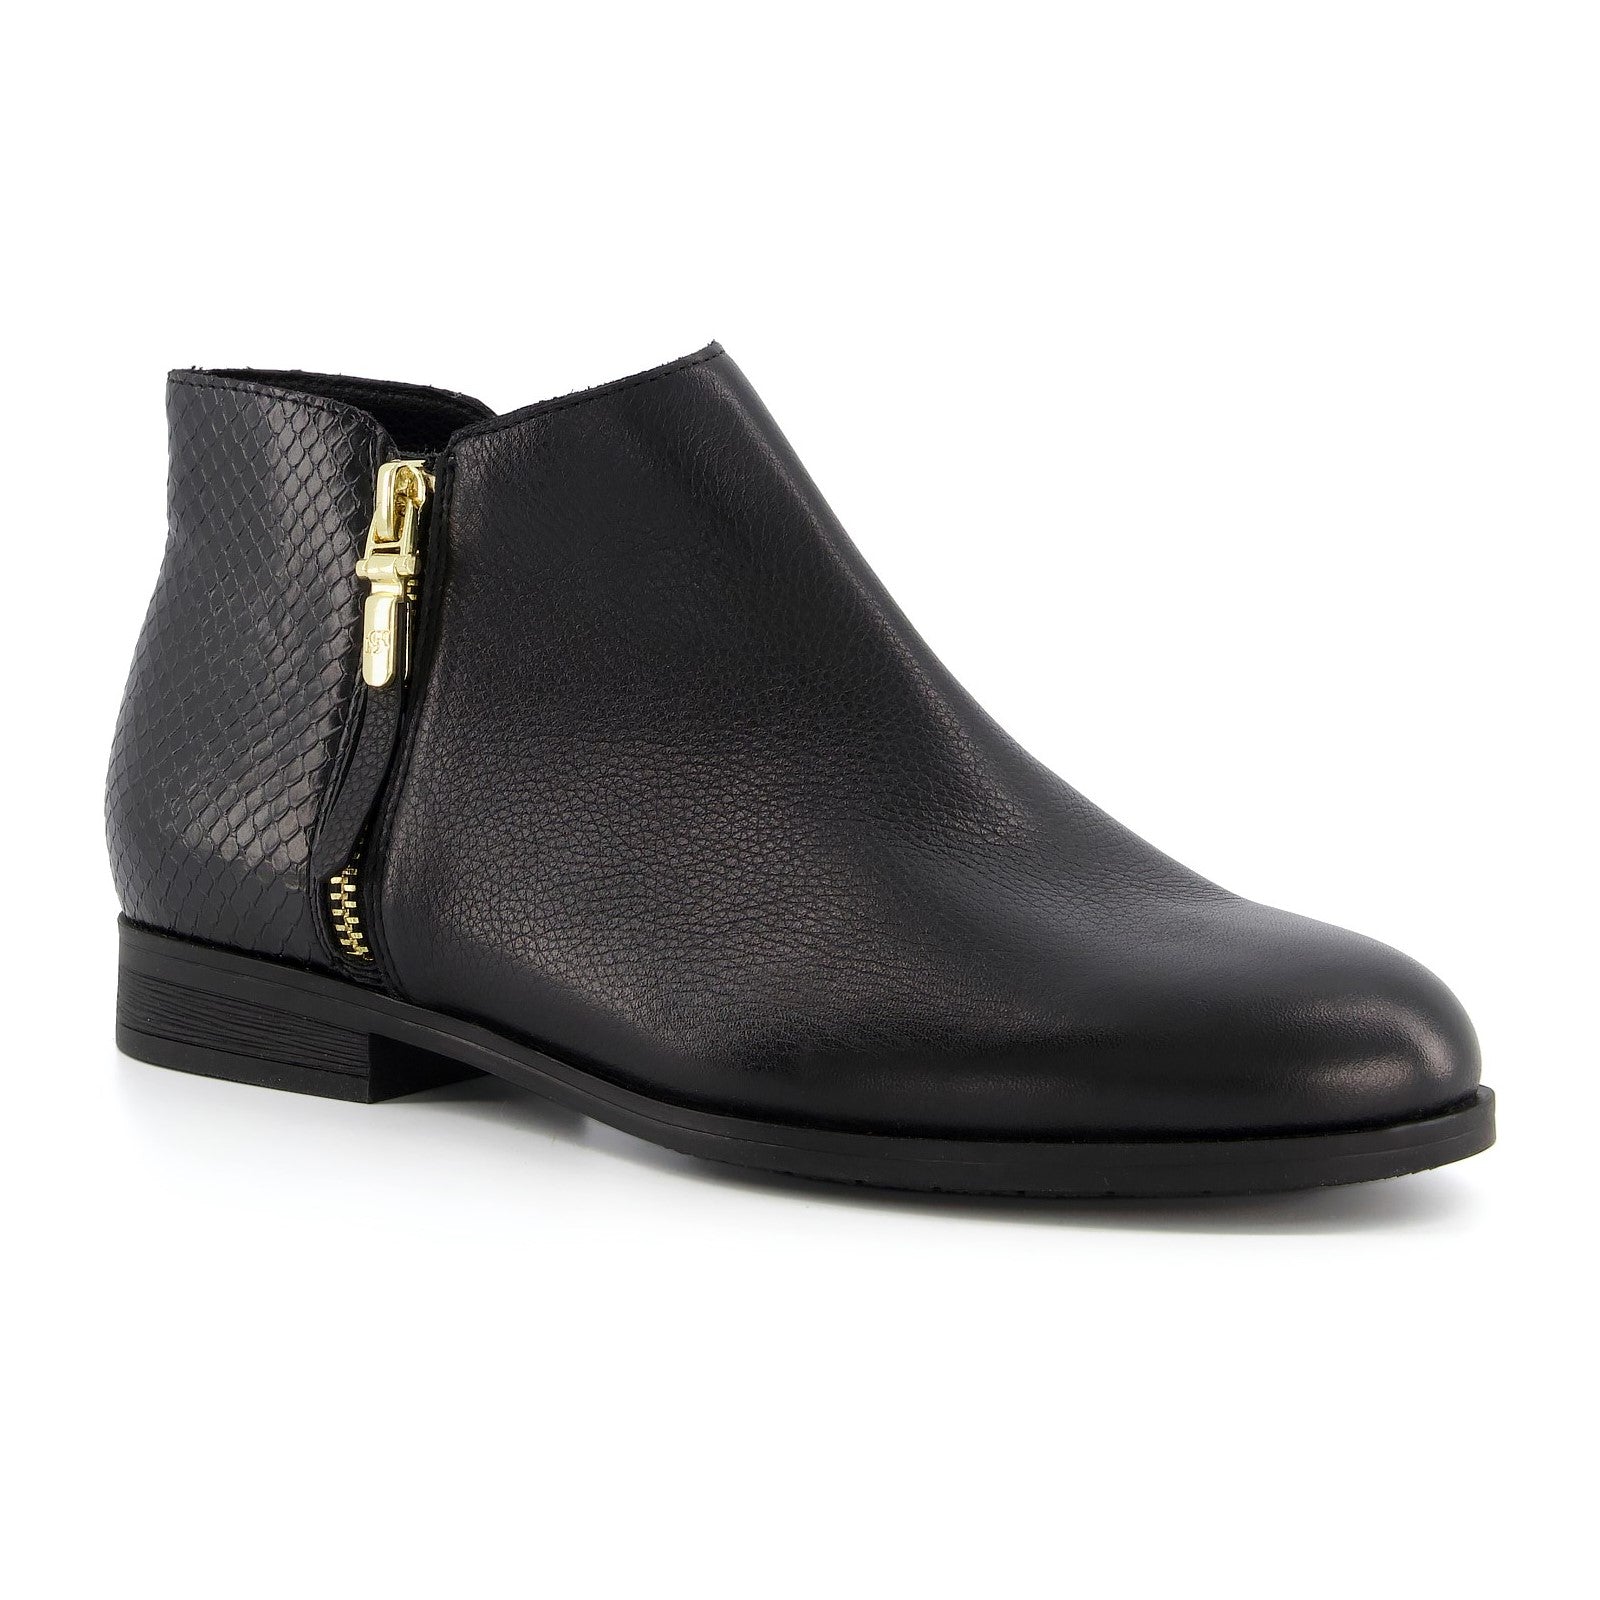 Dune London Pandie Ankle Boots